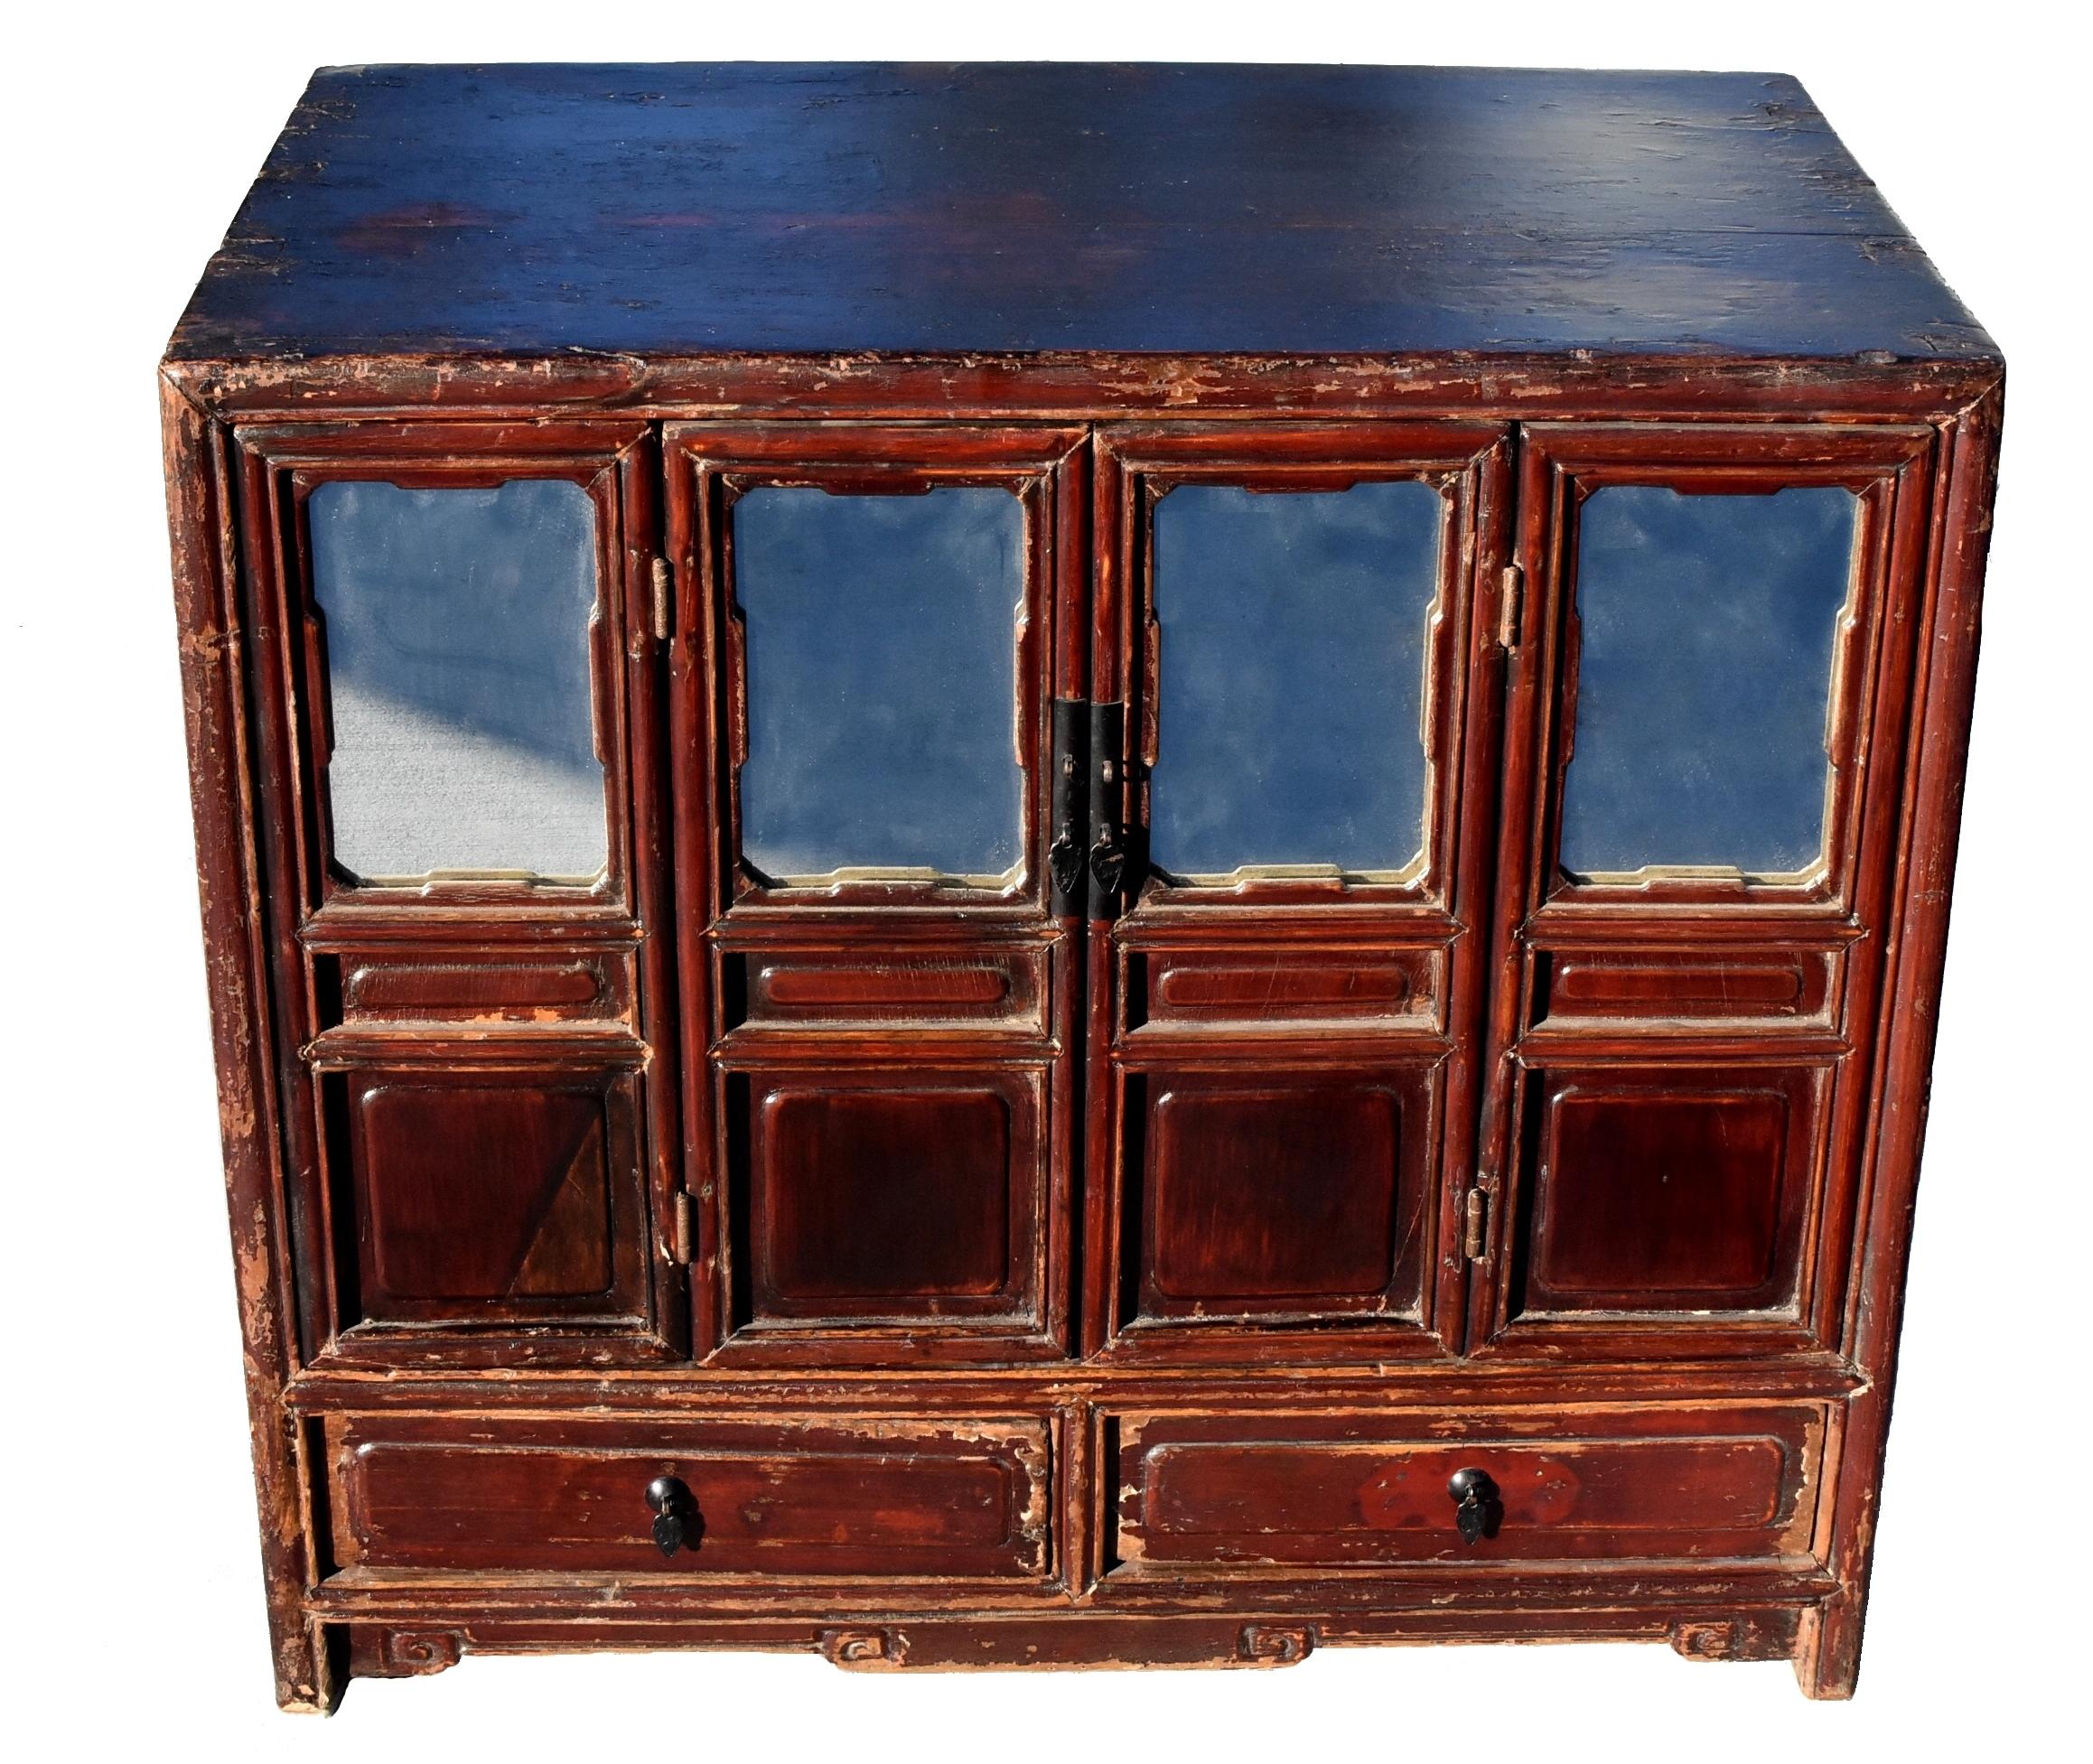 A beautiful, 19th century Kang chest in solid wood with mitered tenon and mortise construction. Four mirrored screen doors and 2 full depth drawers. Middle doors open to reveal a large storage interior space. Delicate style with solid stable